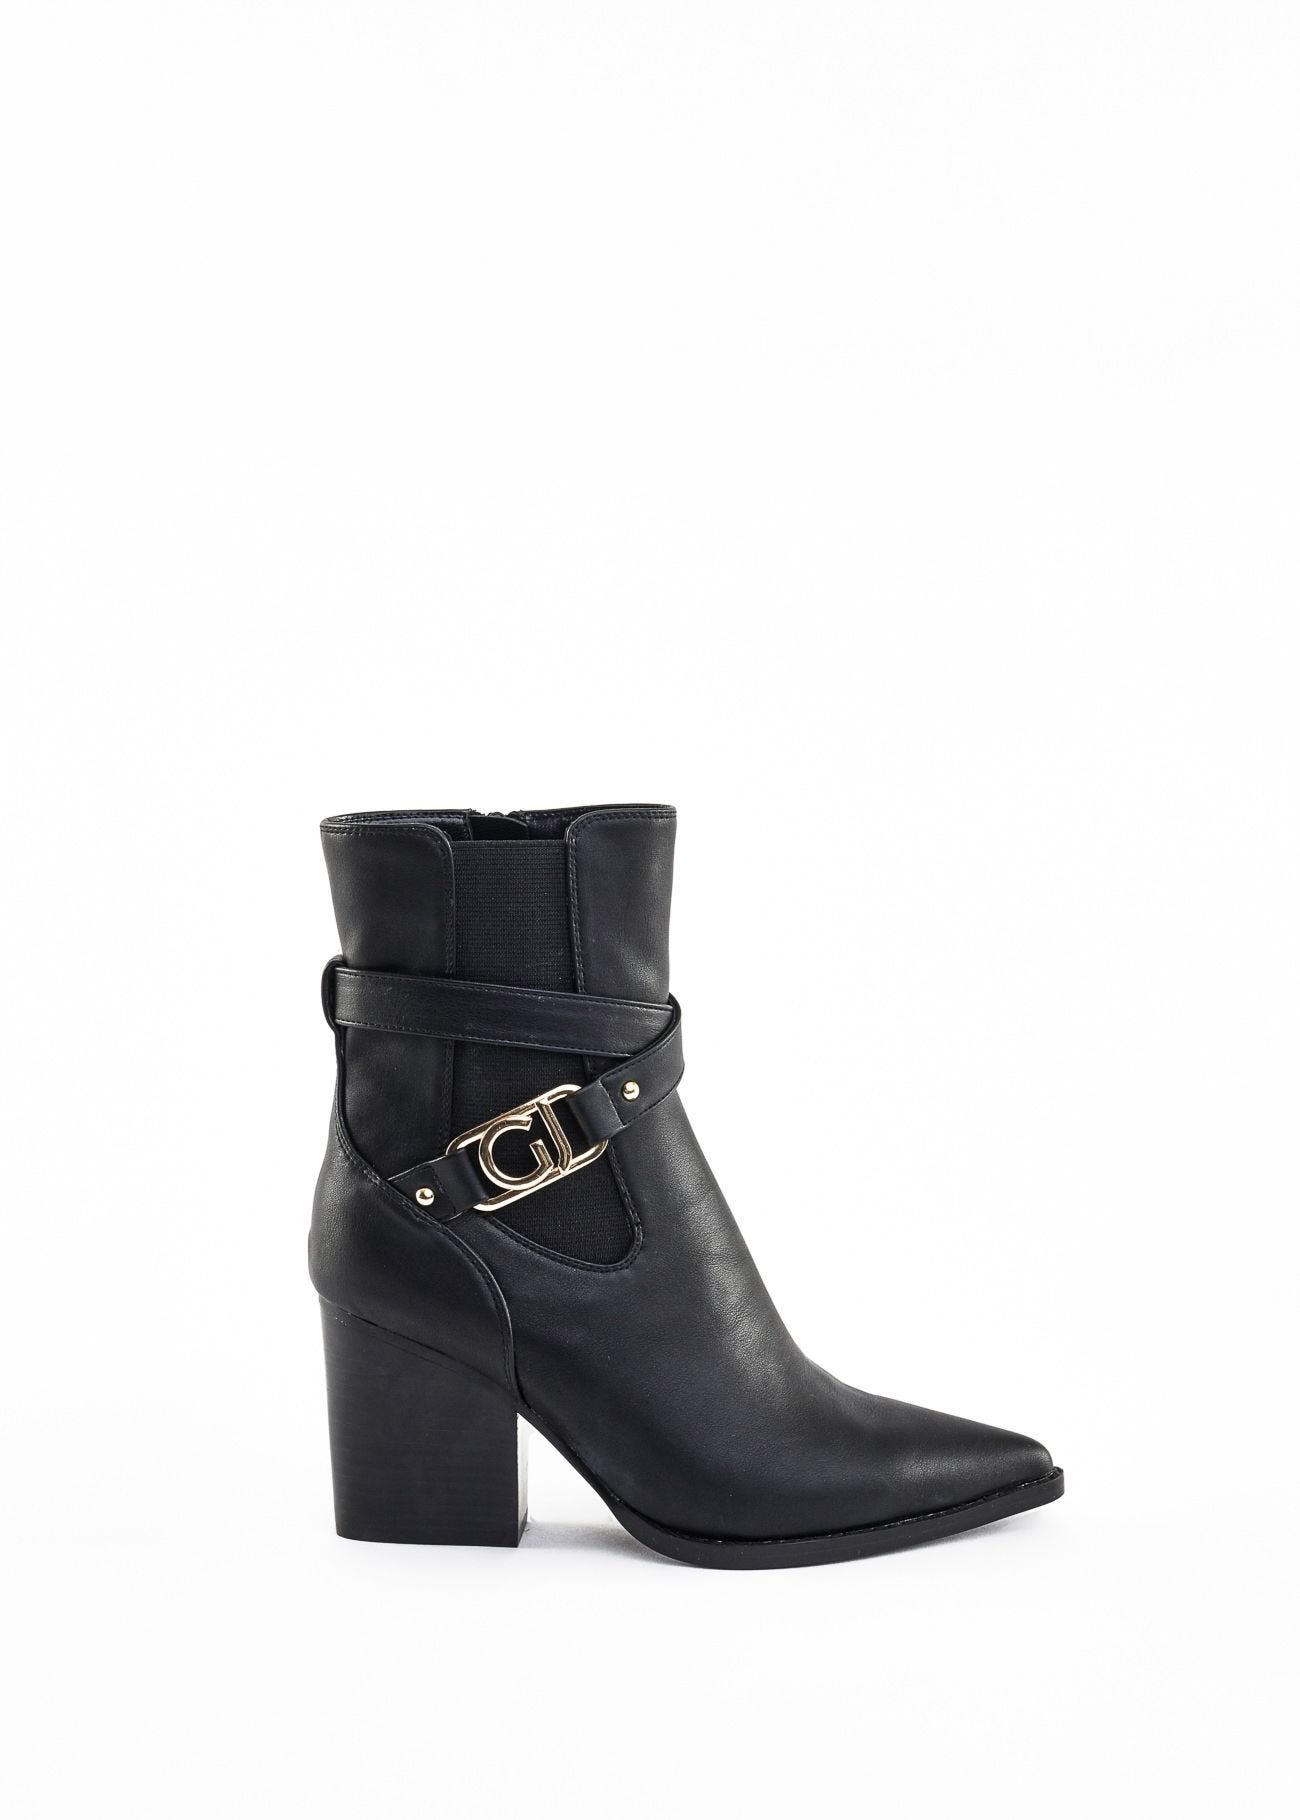 Ankle boots in faux leather